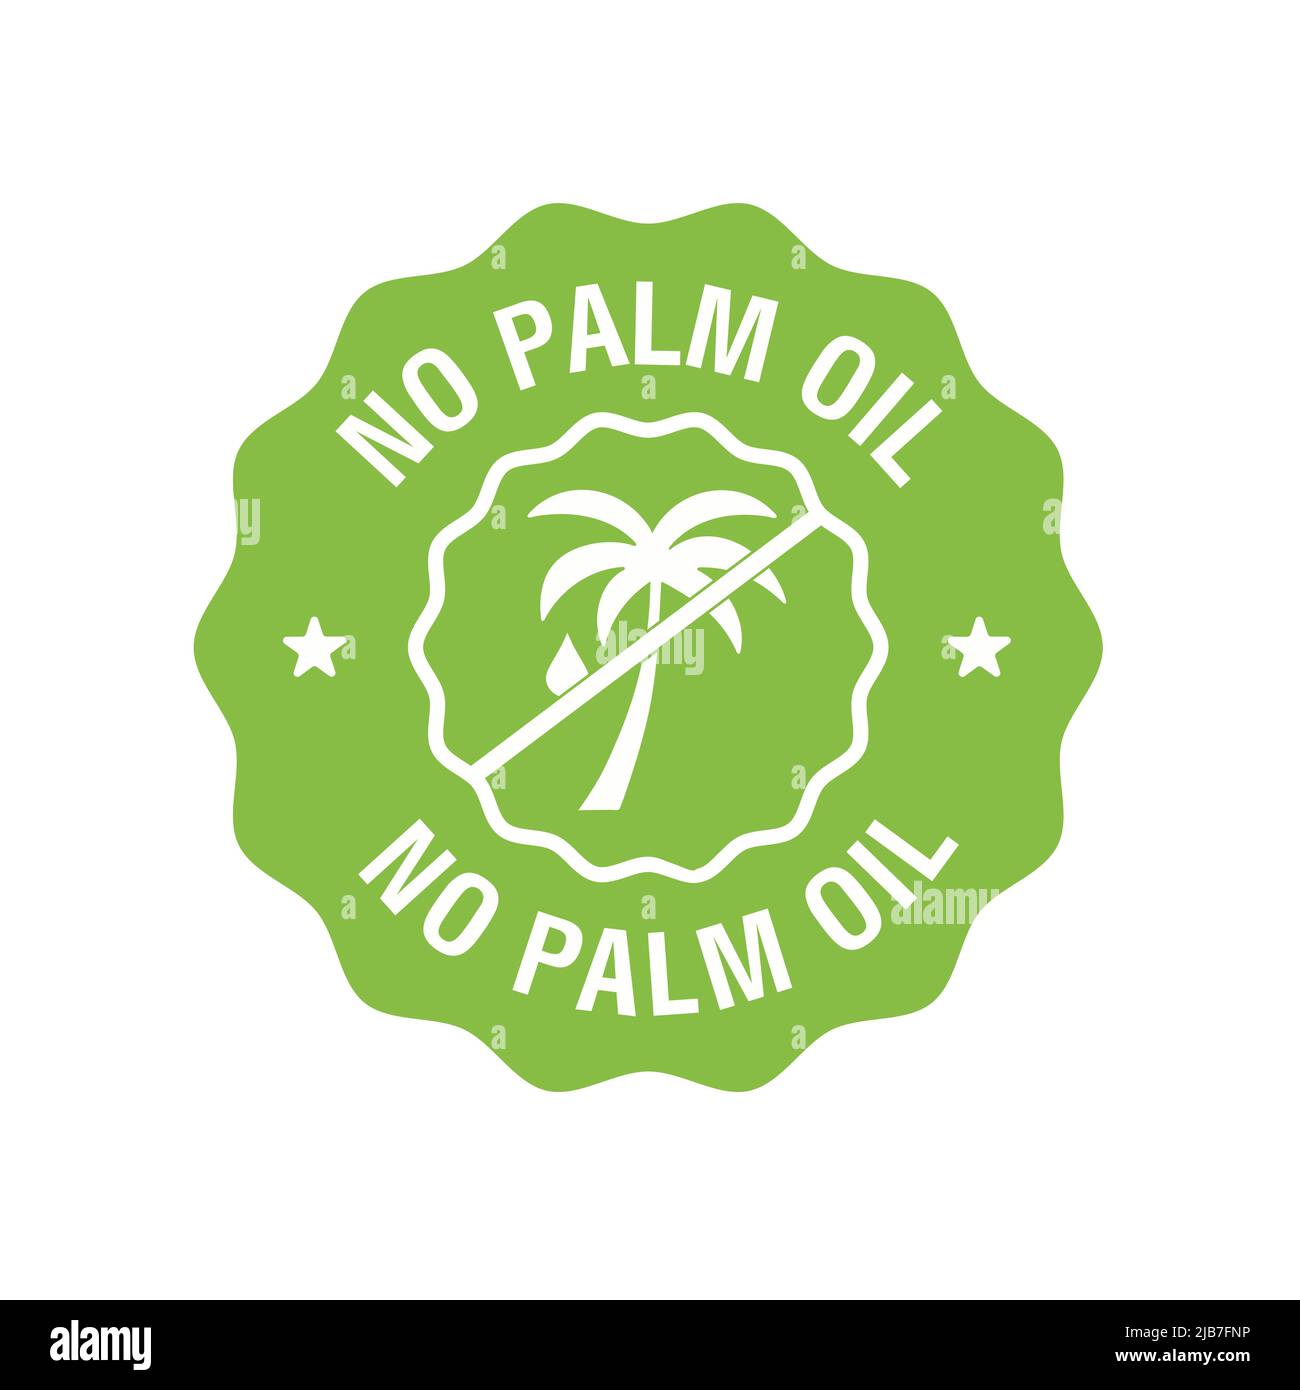 No palm oil green label. Organic food without saturated fats. Product free ingredient. Nutritious dietary, healthy eating habits. Vector Stock Vector